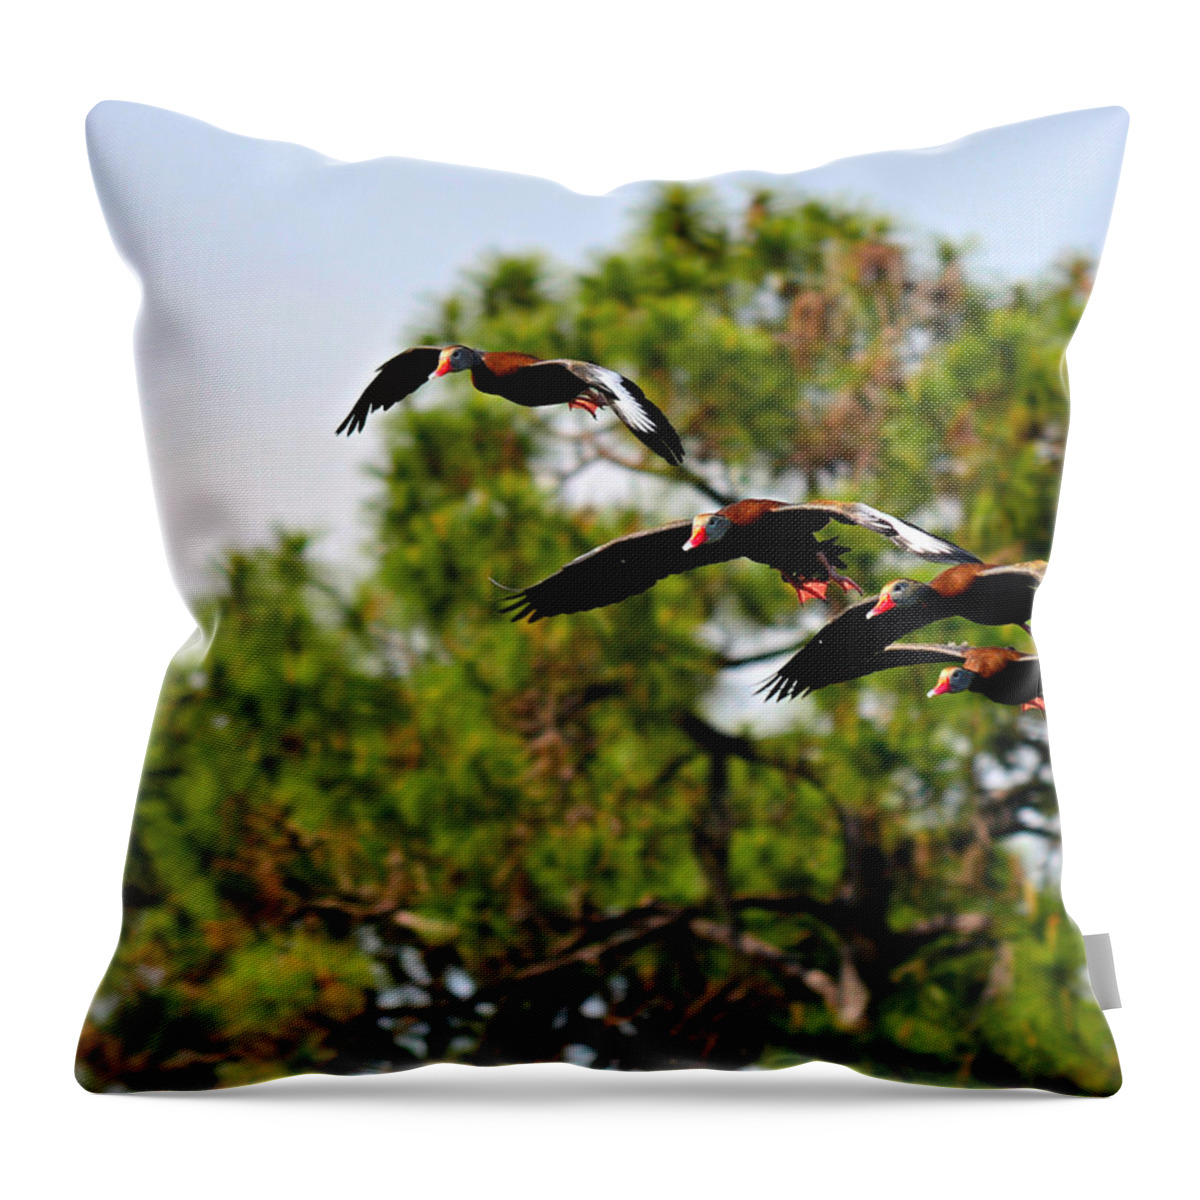 Geese Throw Pillow featuring the digital art Nature Calls by Alison Belsan Horton